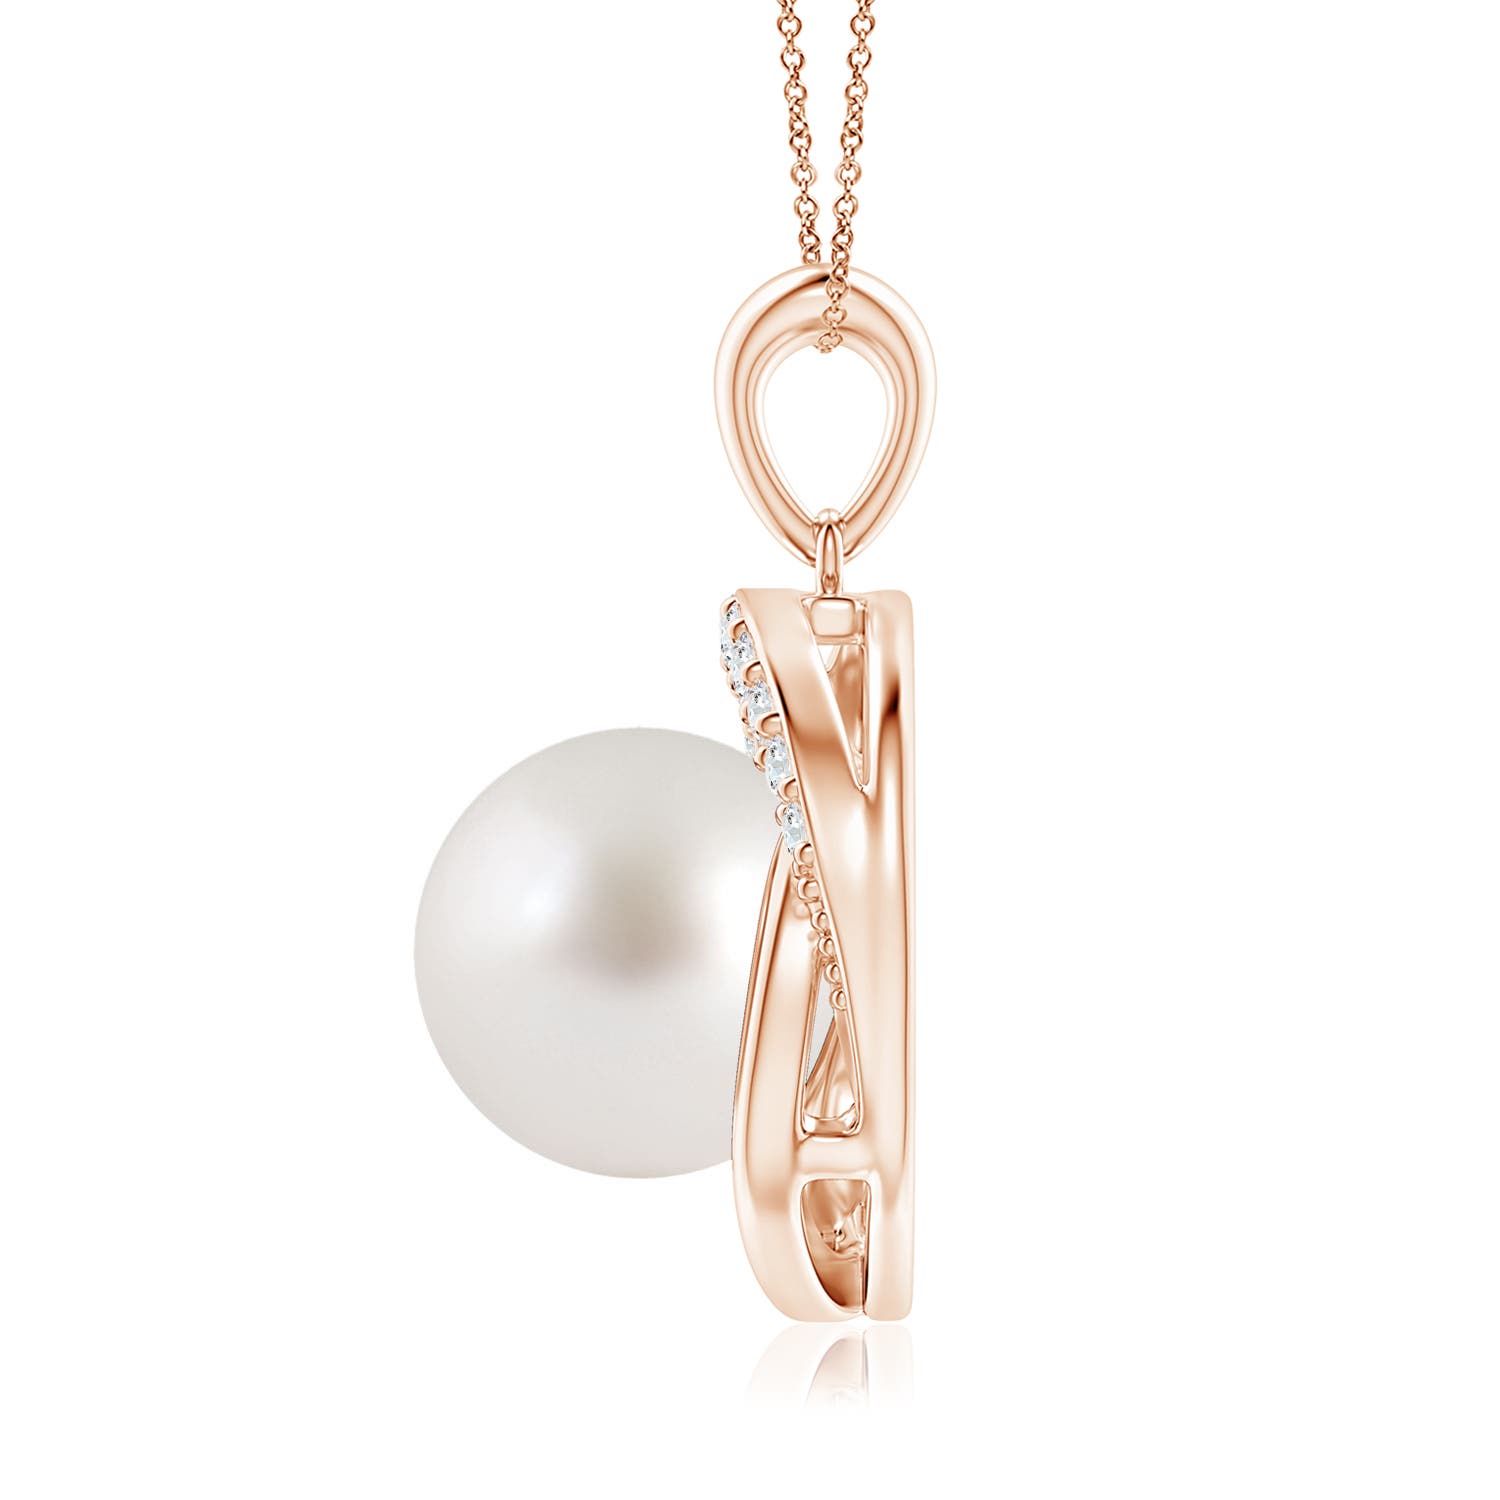 AAA - South Sea Cultured Pearl / 7.33 CT / 14 KT Rose Gold